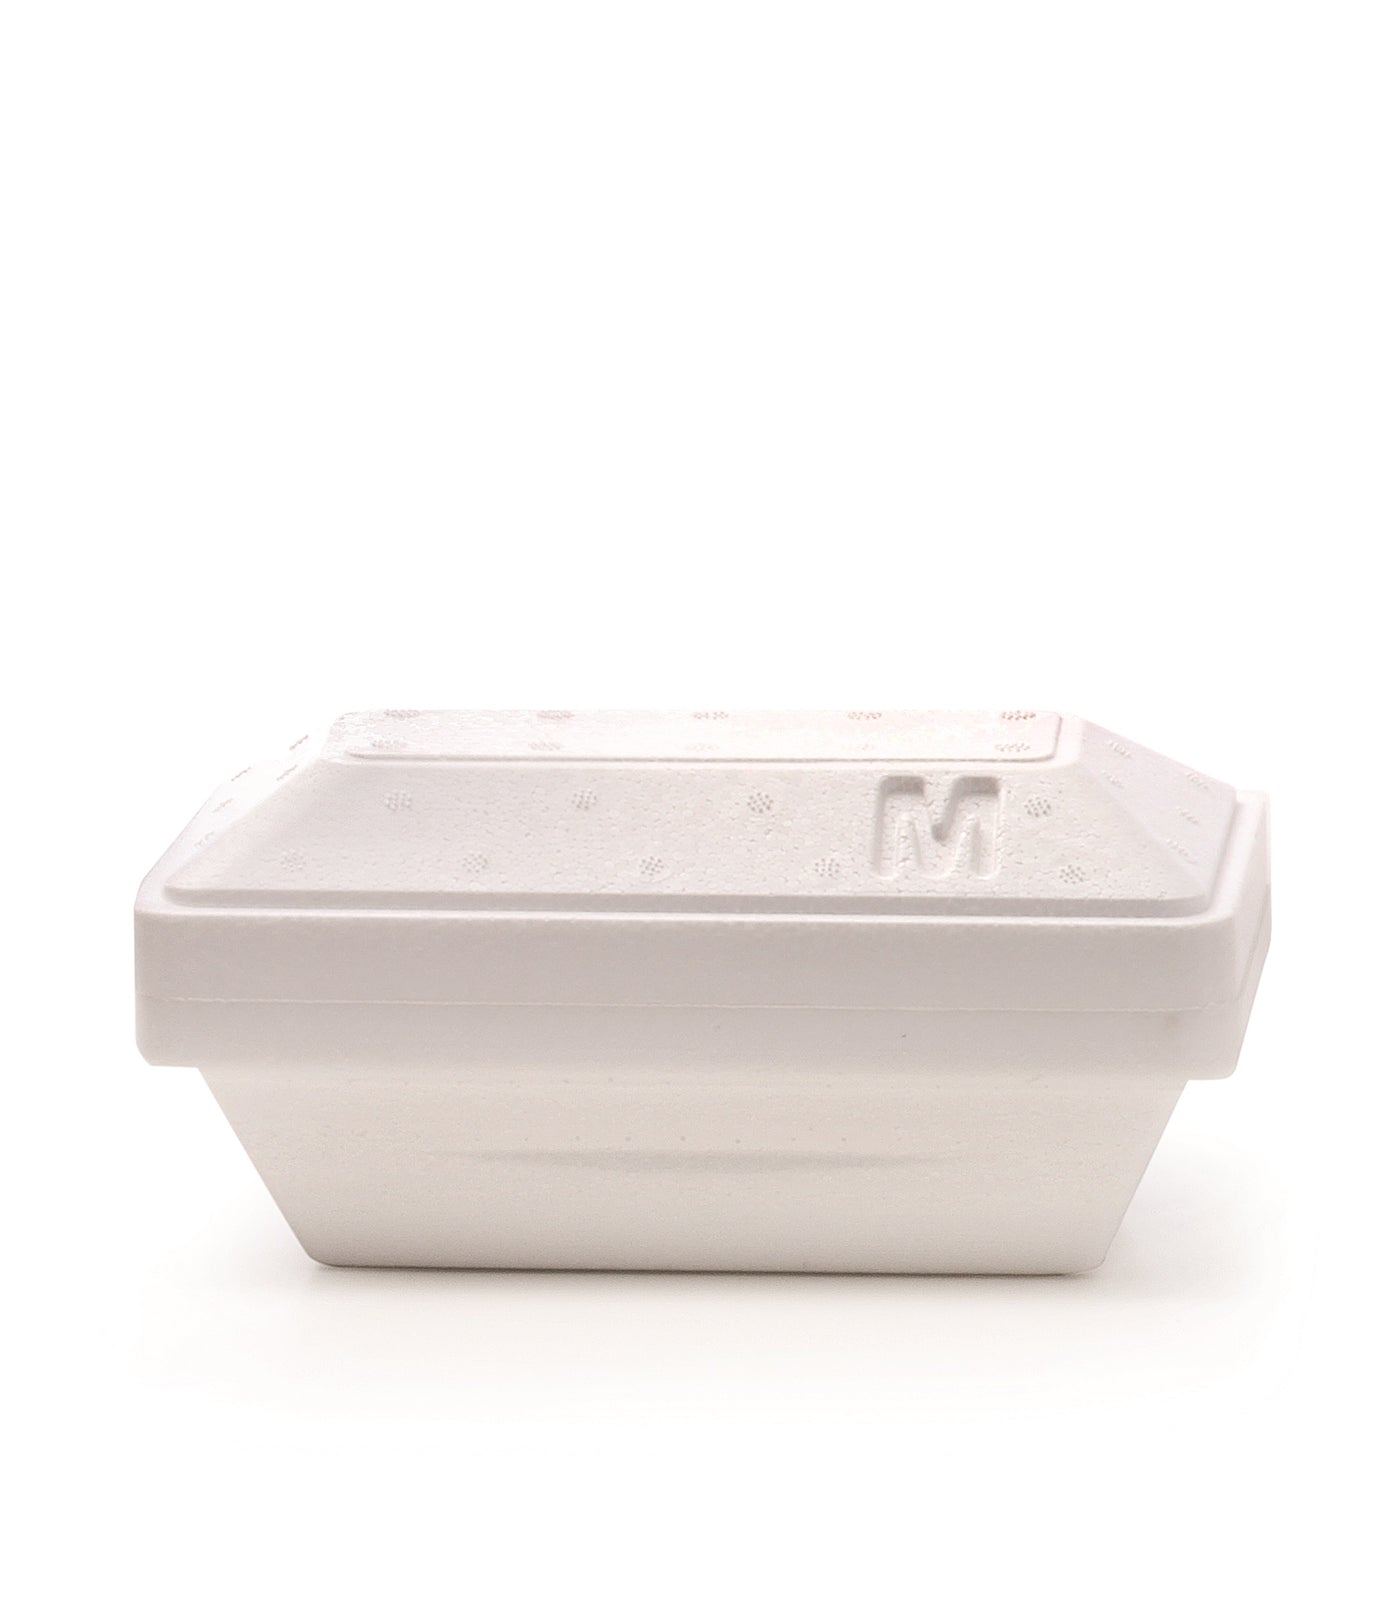 750g/1000cc Takeout Containers – World of Gelato